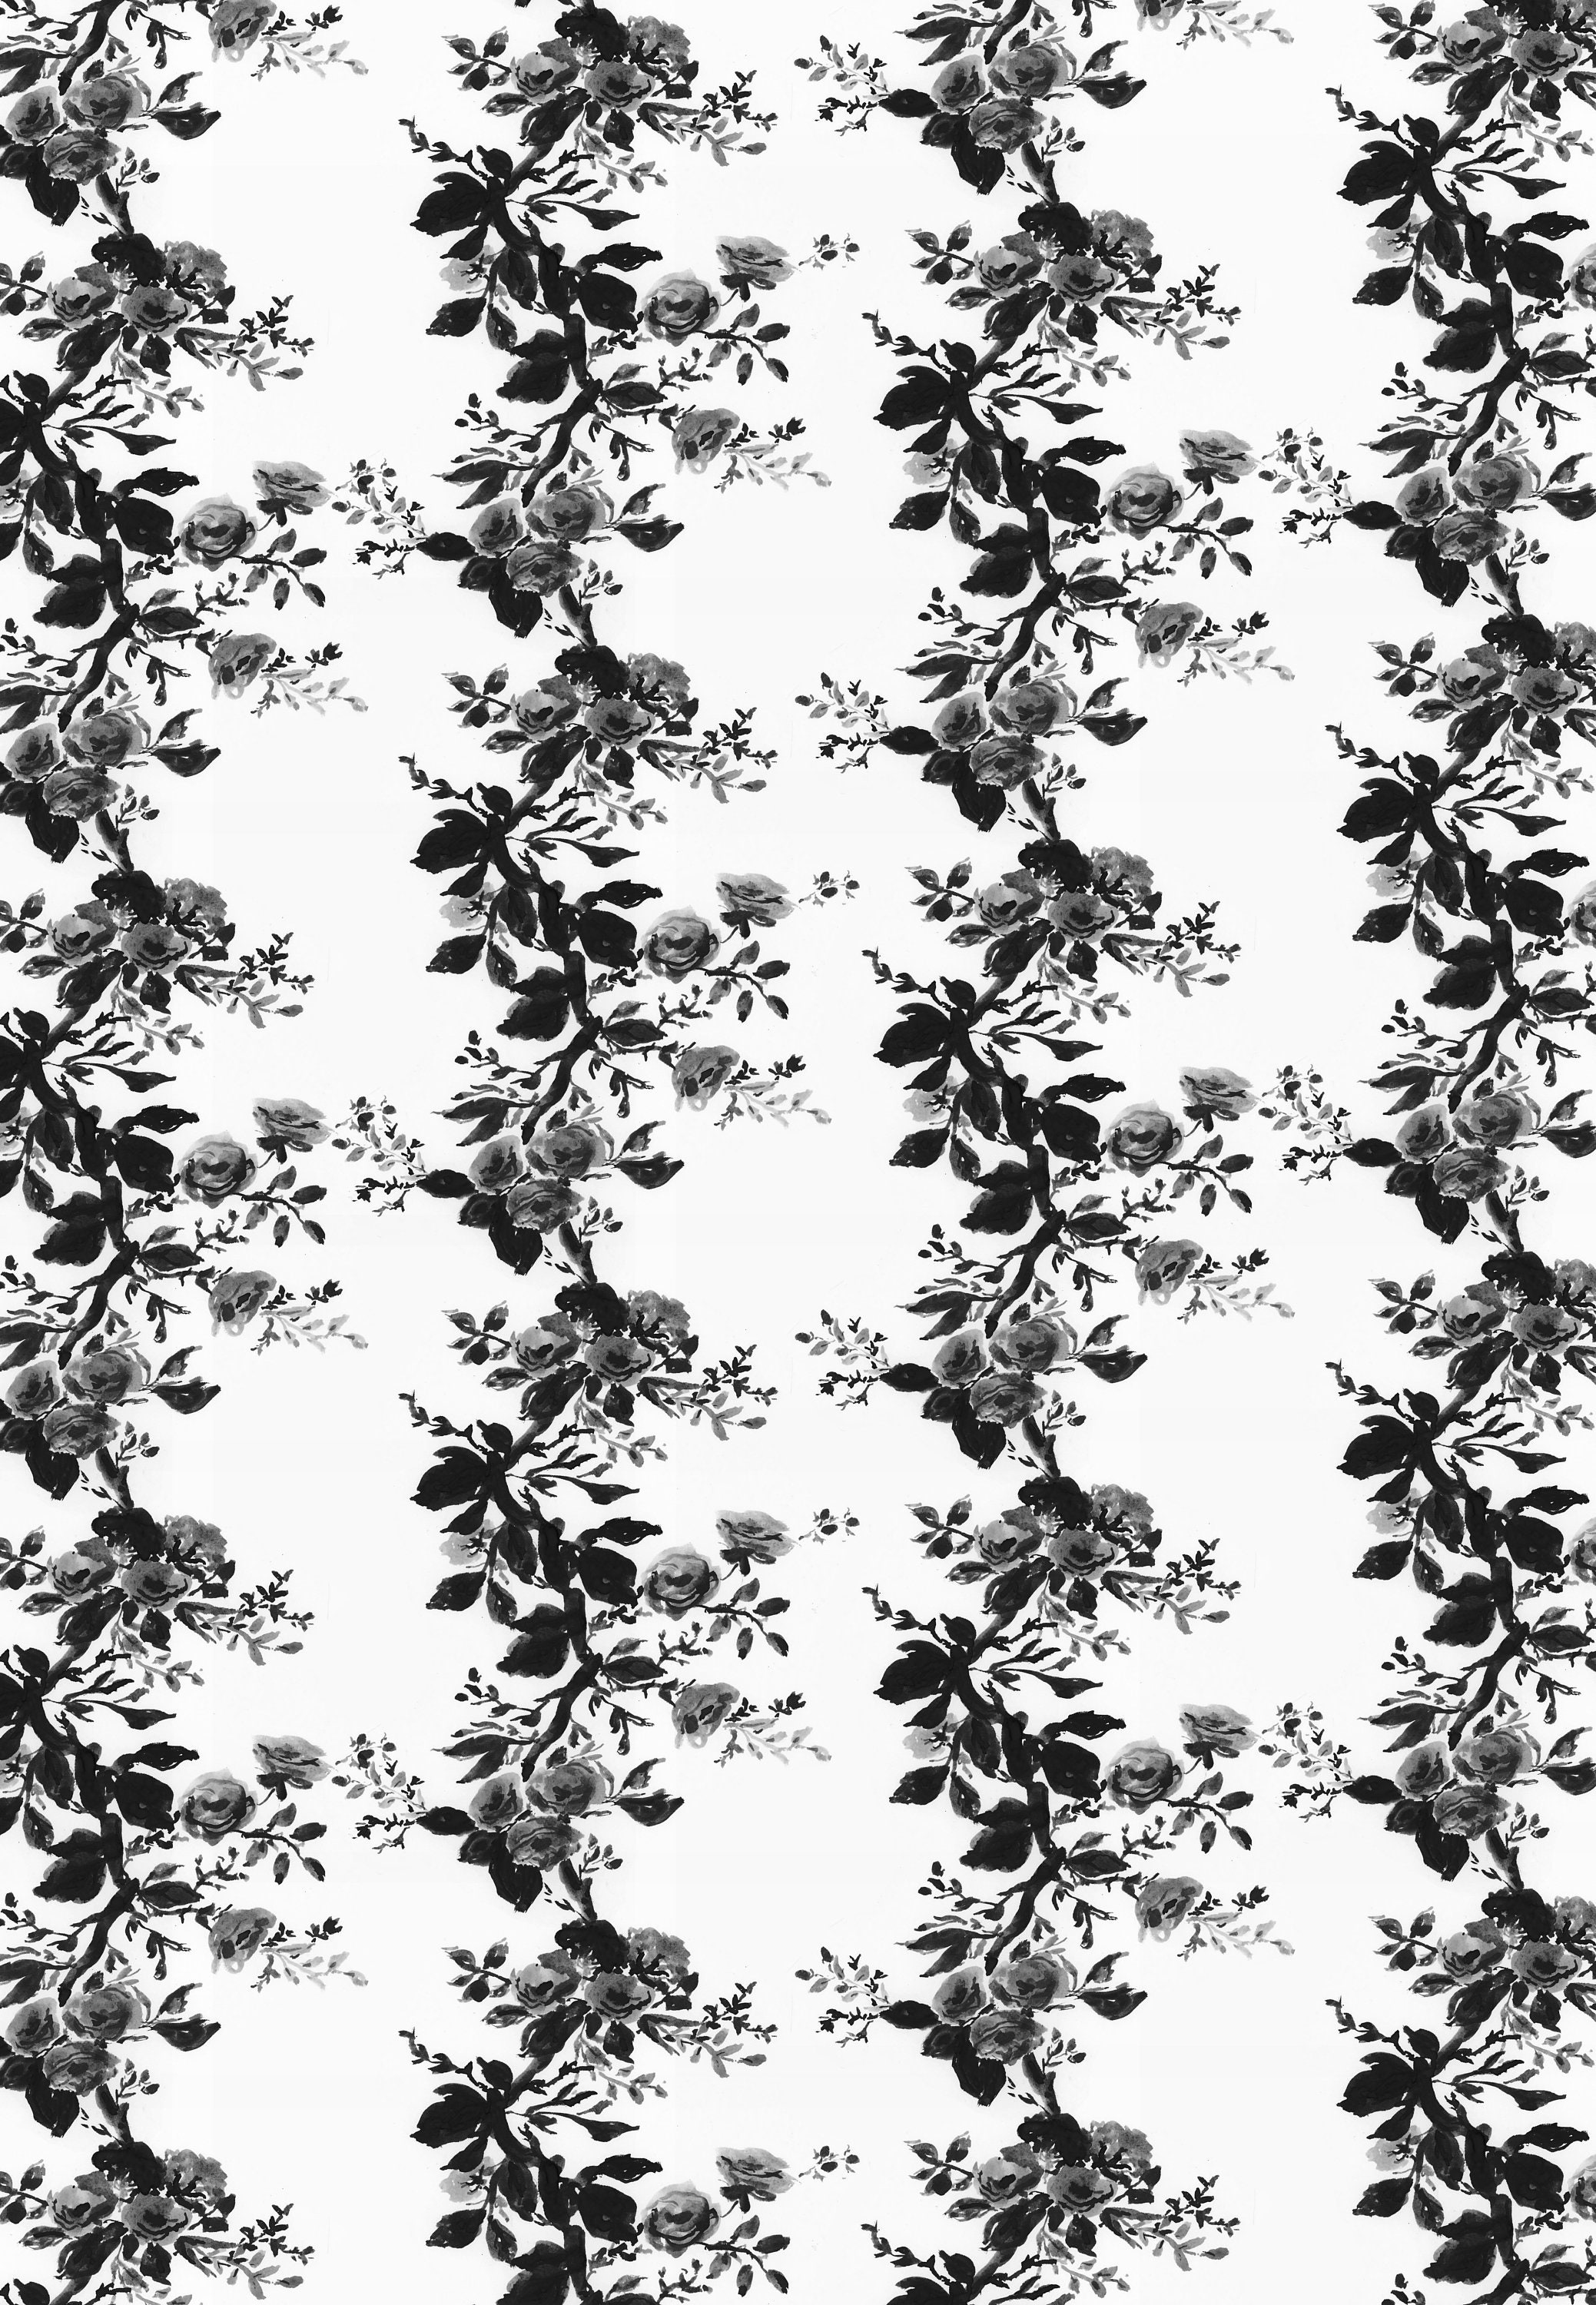 Wrapping Paper: Black Floral Vine gift Wrap, Birthday, Holiday, Christmas 